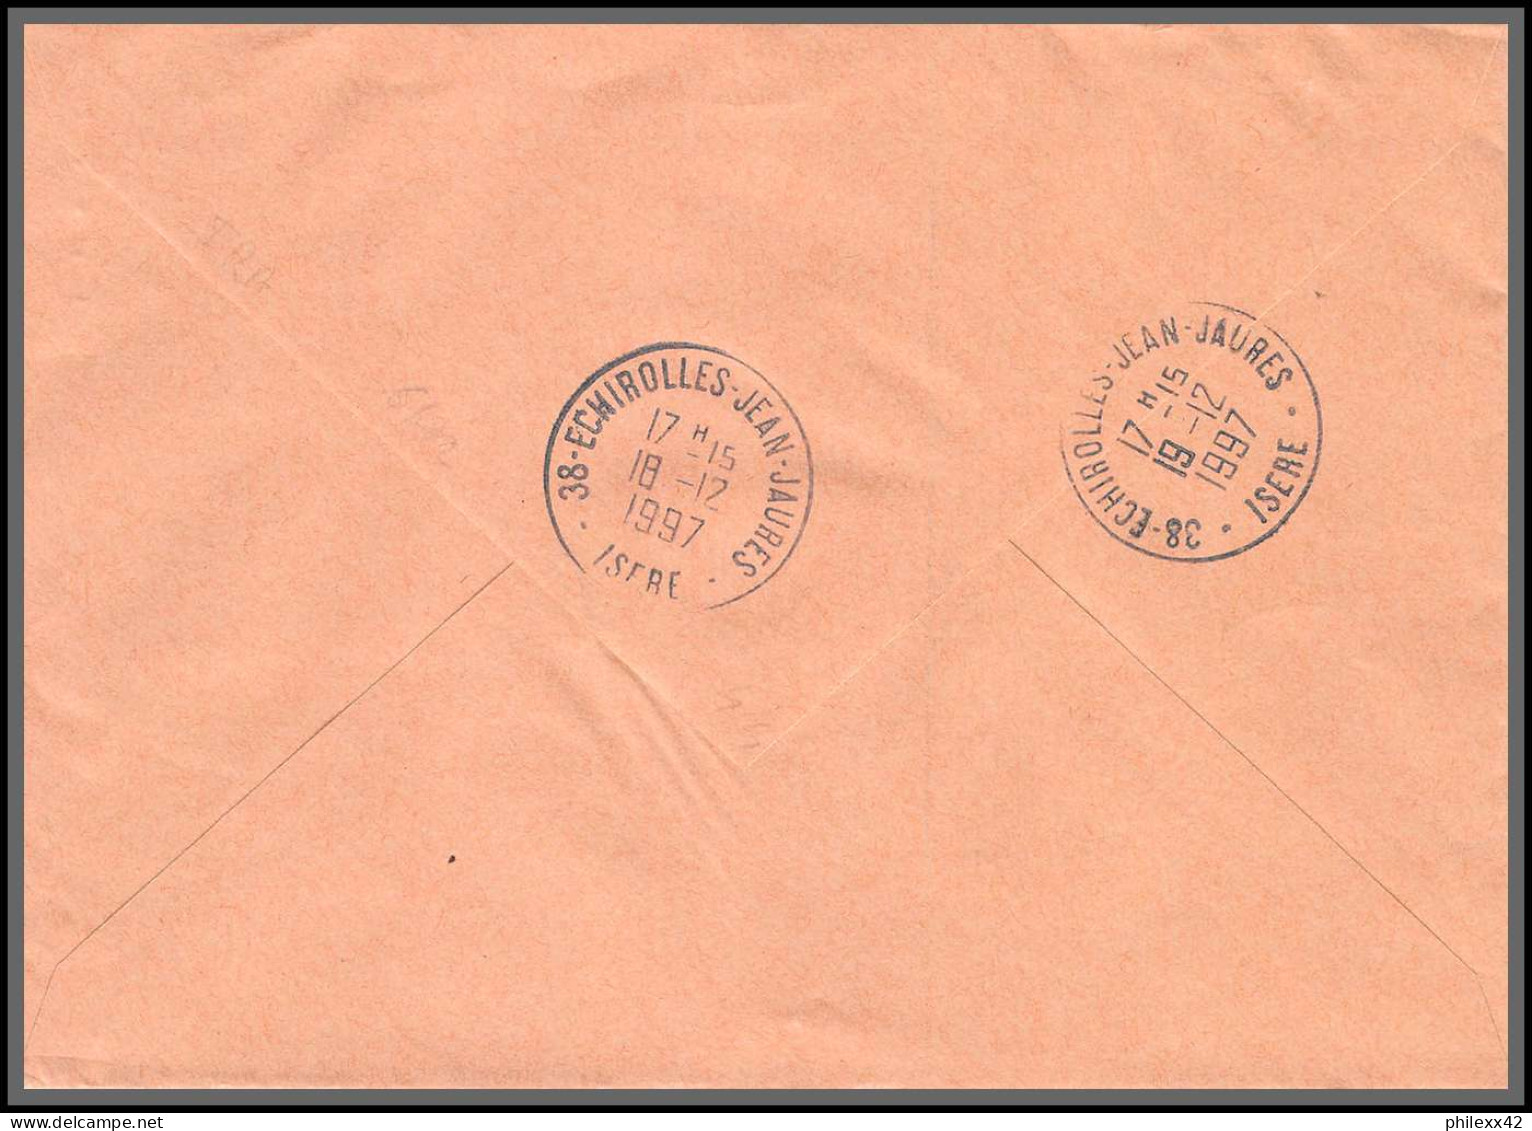 74486 Mixte Briat Luquet Mayotte St Pierre 11/12/1997 Iracoubo Guyane Echirolles Isère Lettre Cover Colonies - 1997-2004 Marianne Of July 14th